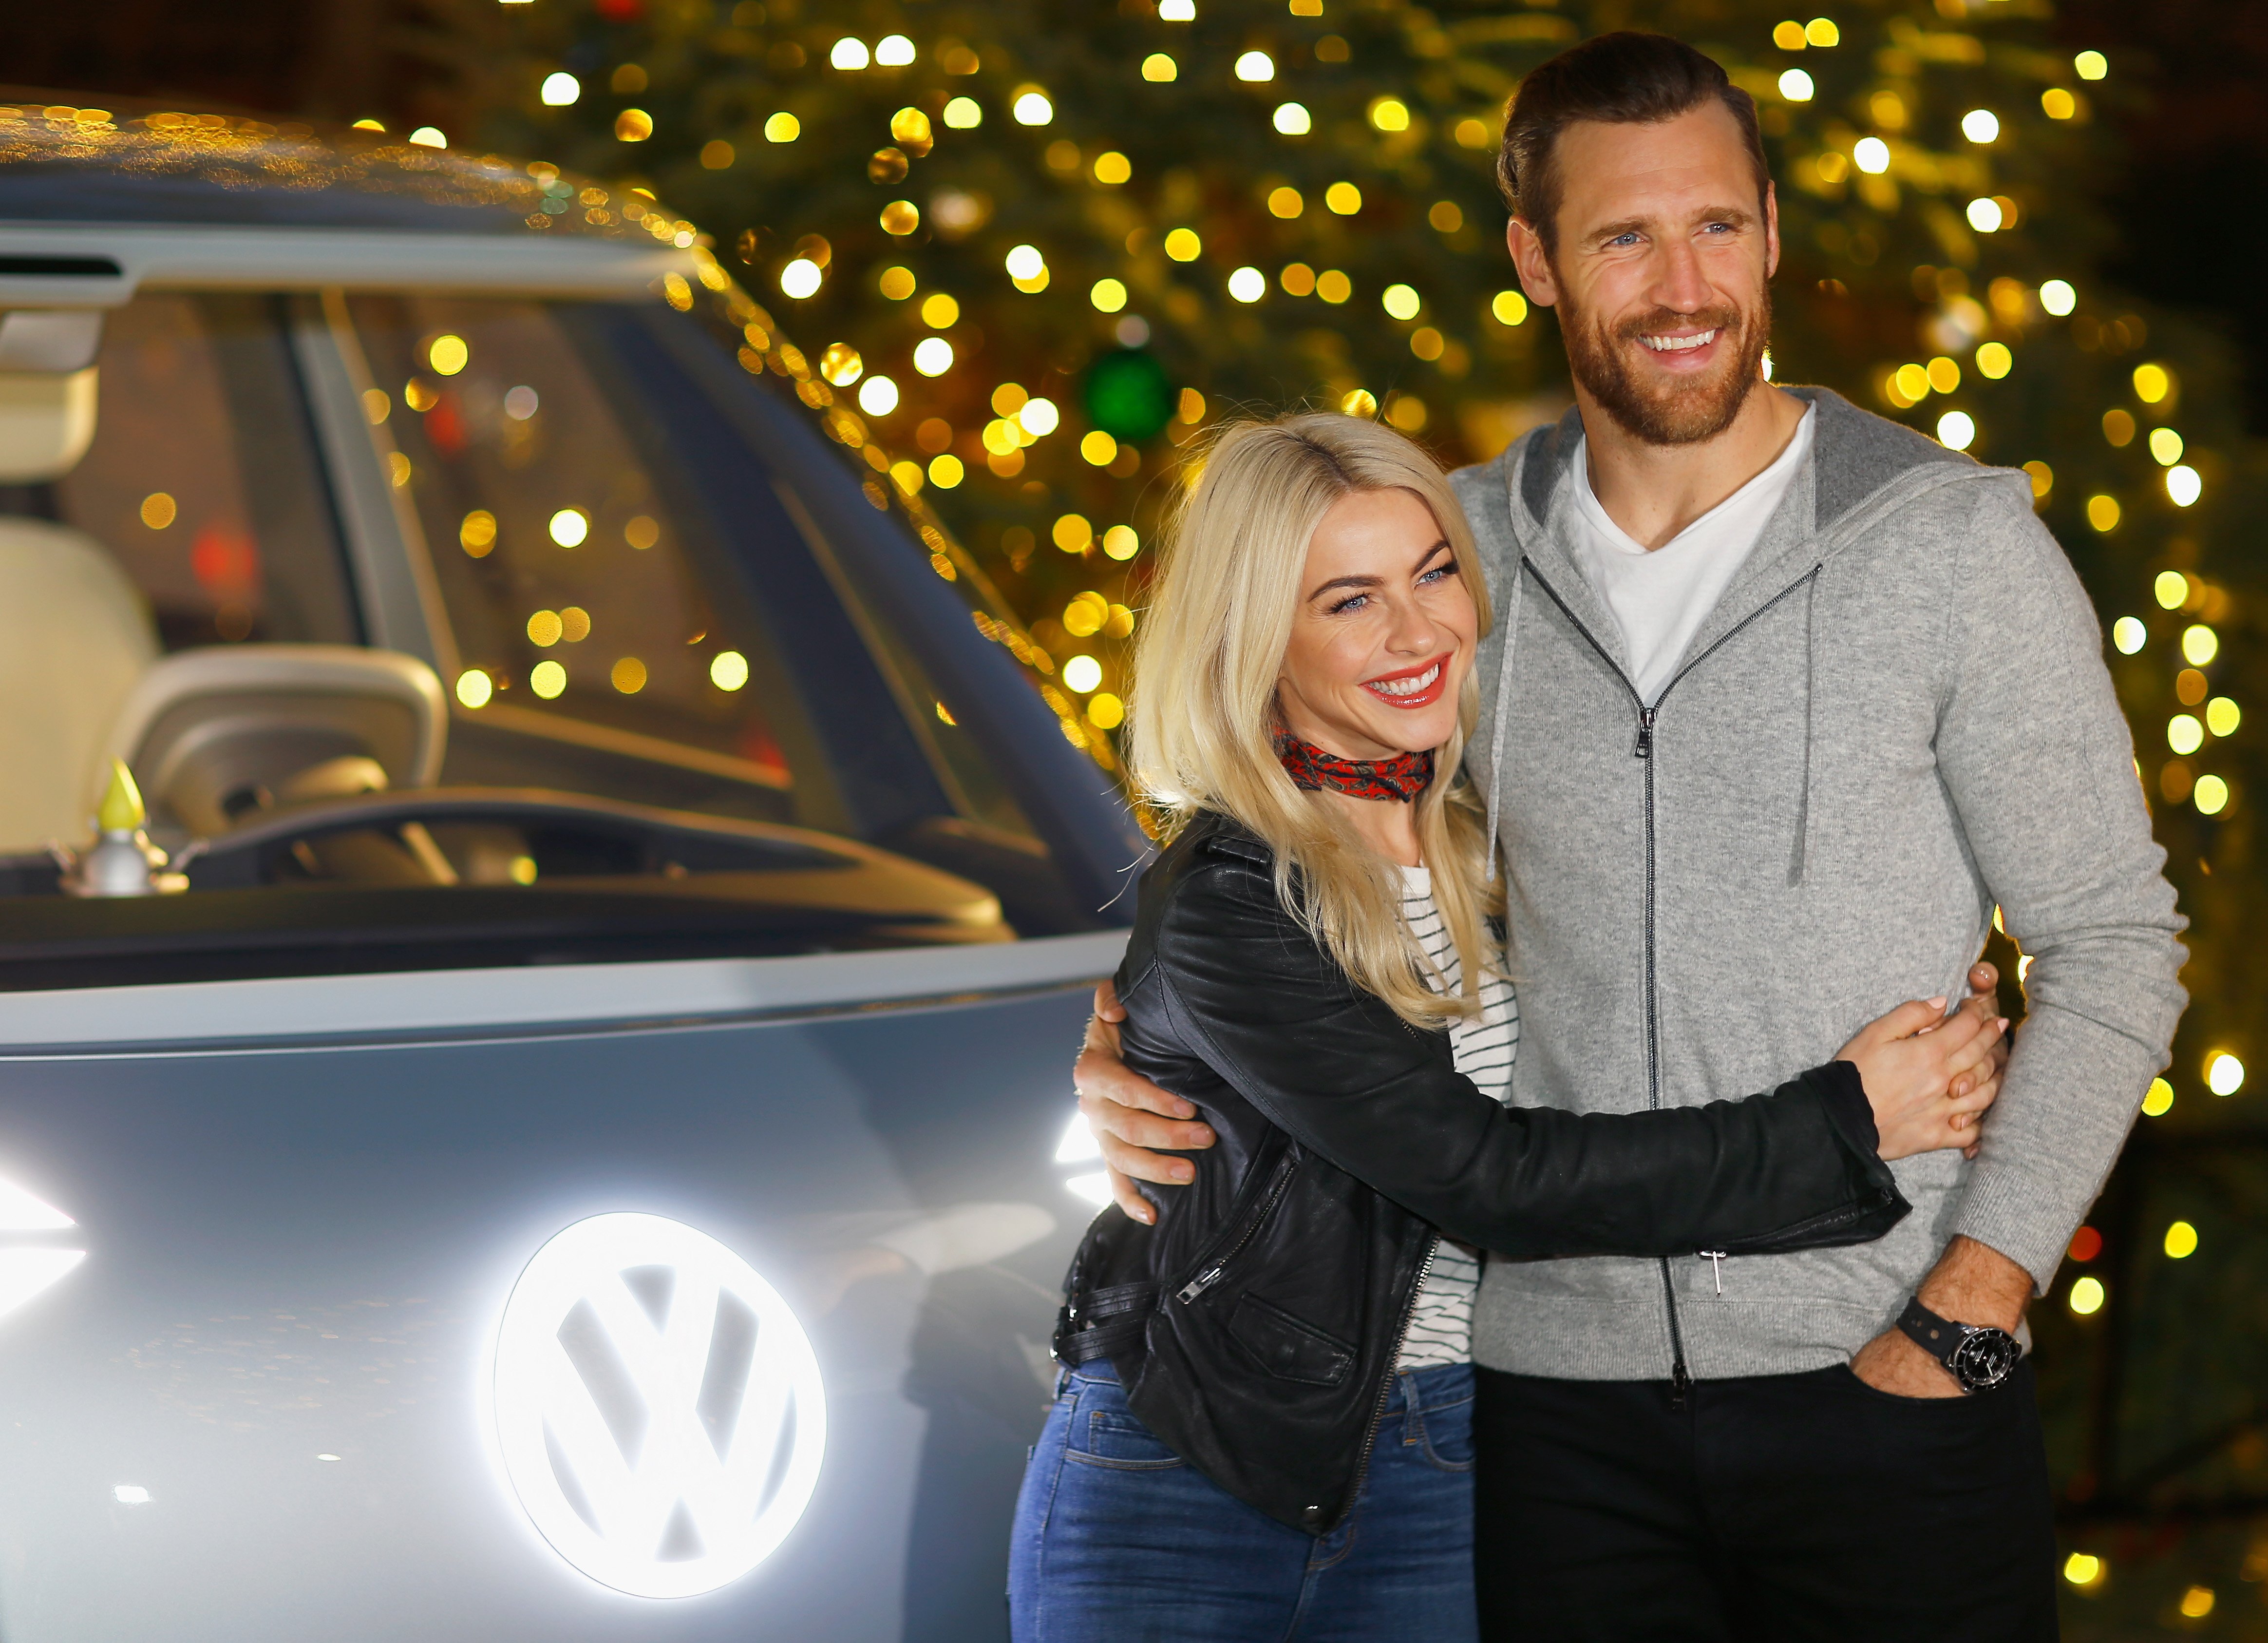 Julianne Hough and Brooks Laich attend the Volkswagen Holiday Drive-In Event in Los Angeles, California on December 16, 2017. | Source: Getty Images.